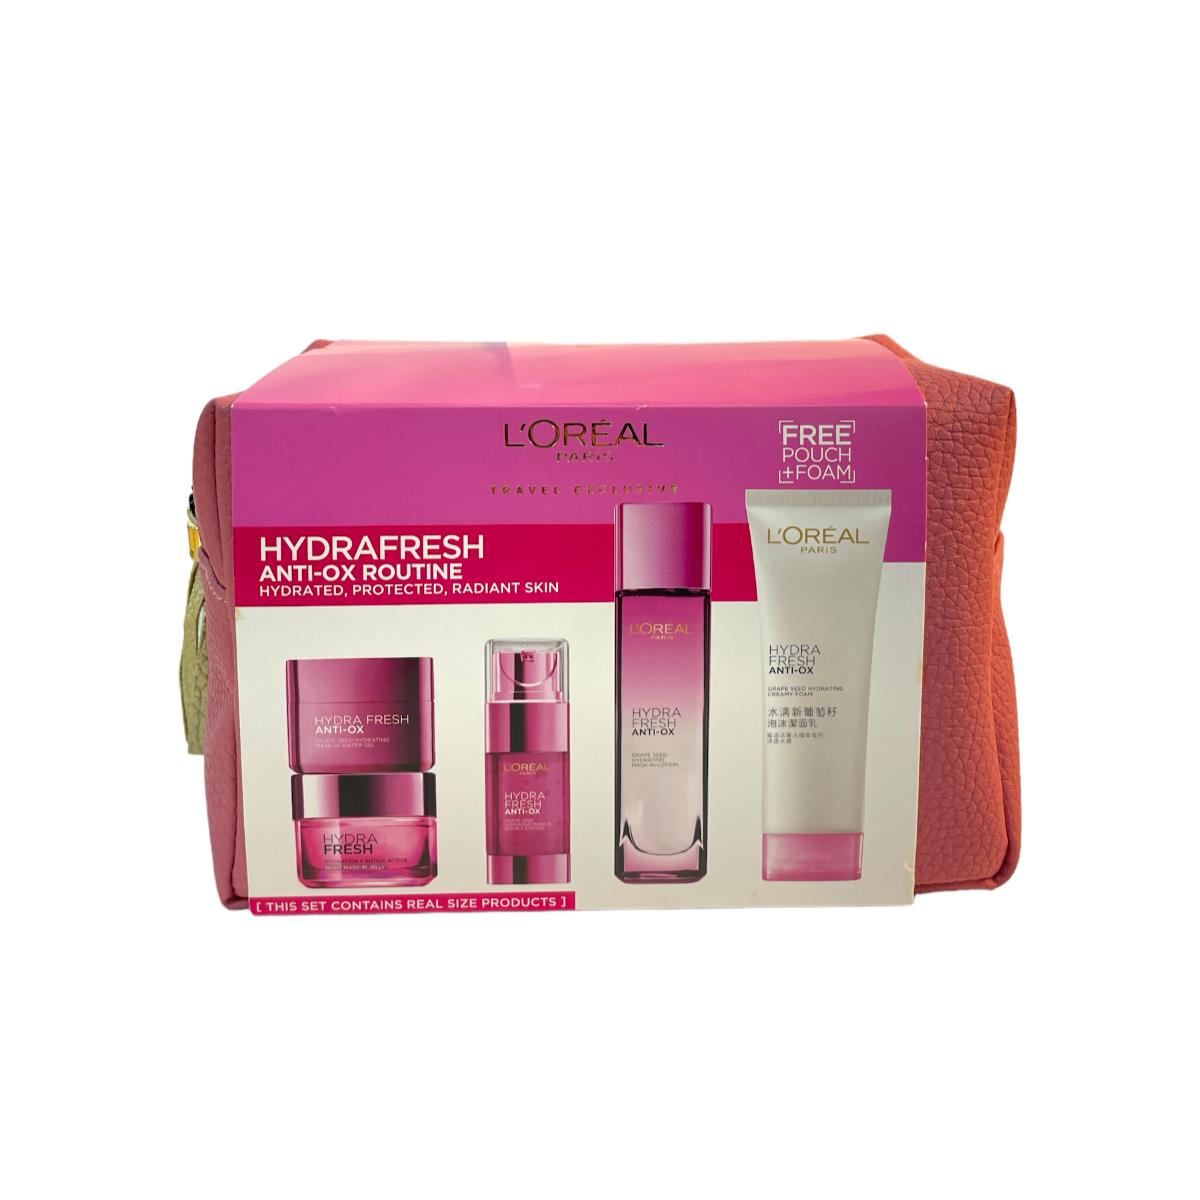 L`oreal Hydrafresh Travel Exclusive 5Kit Anti-ox Routine As Seen In Pictures